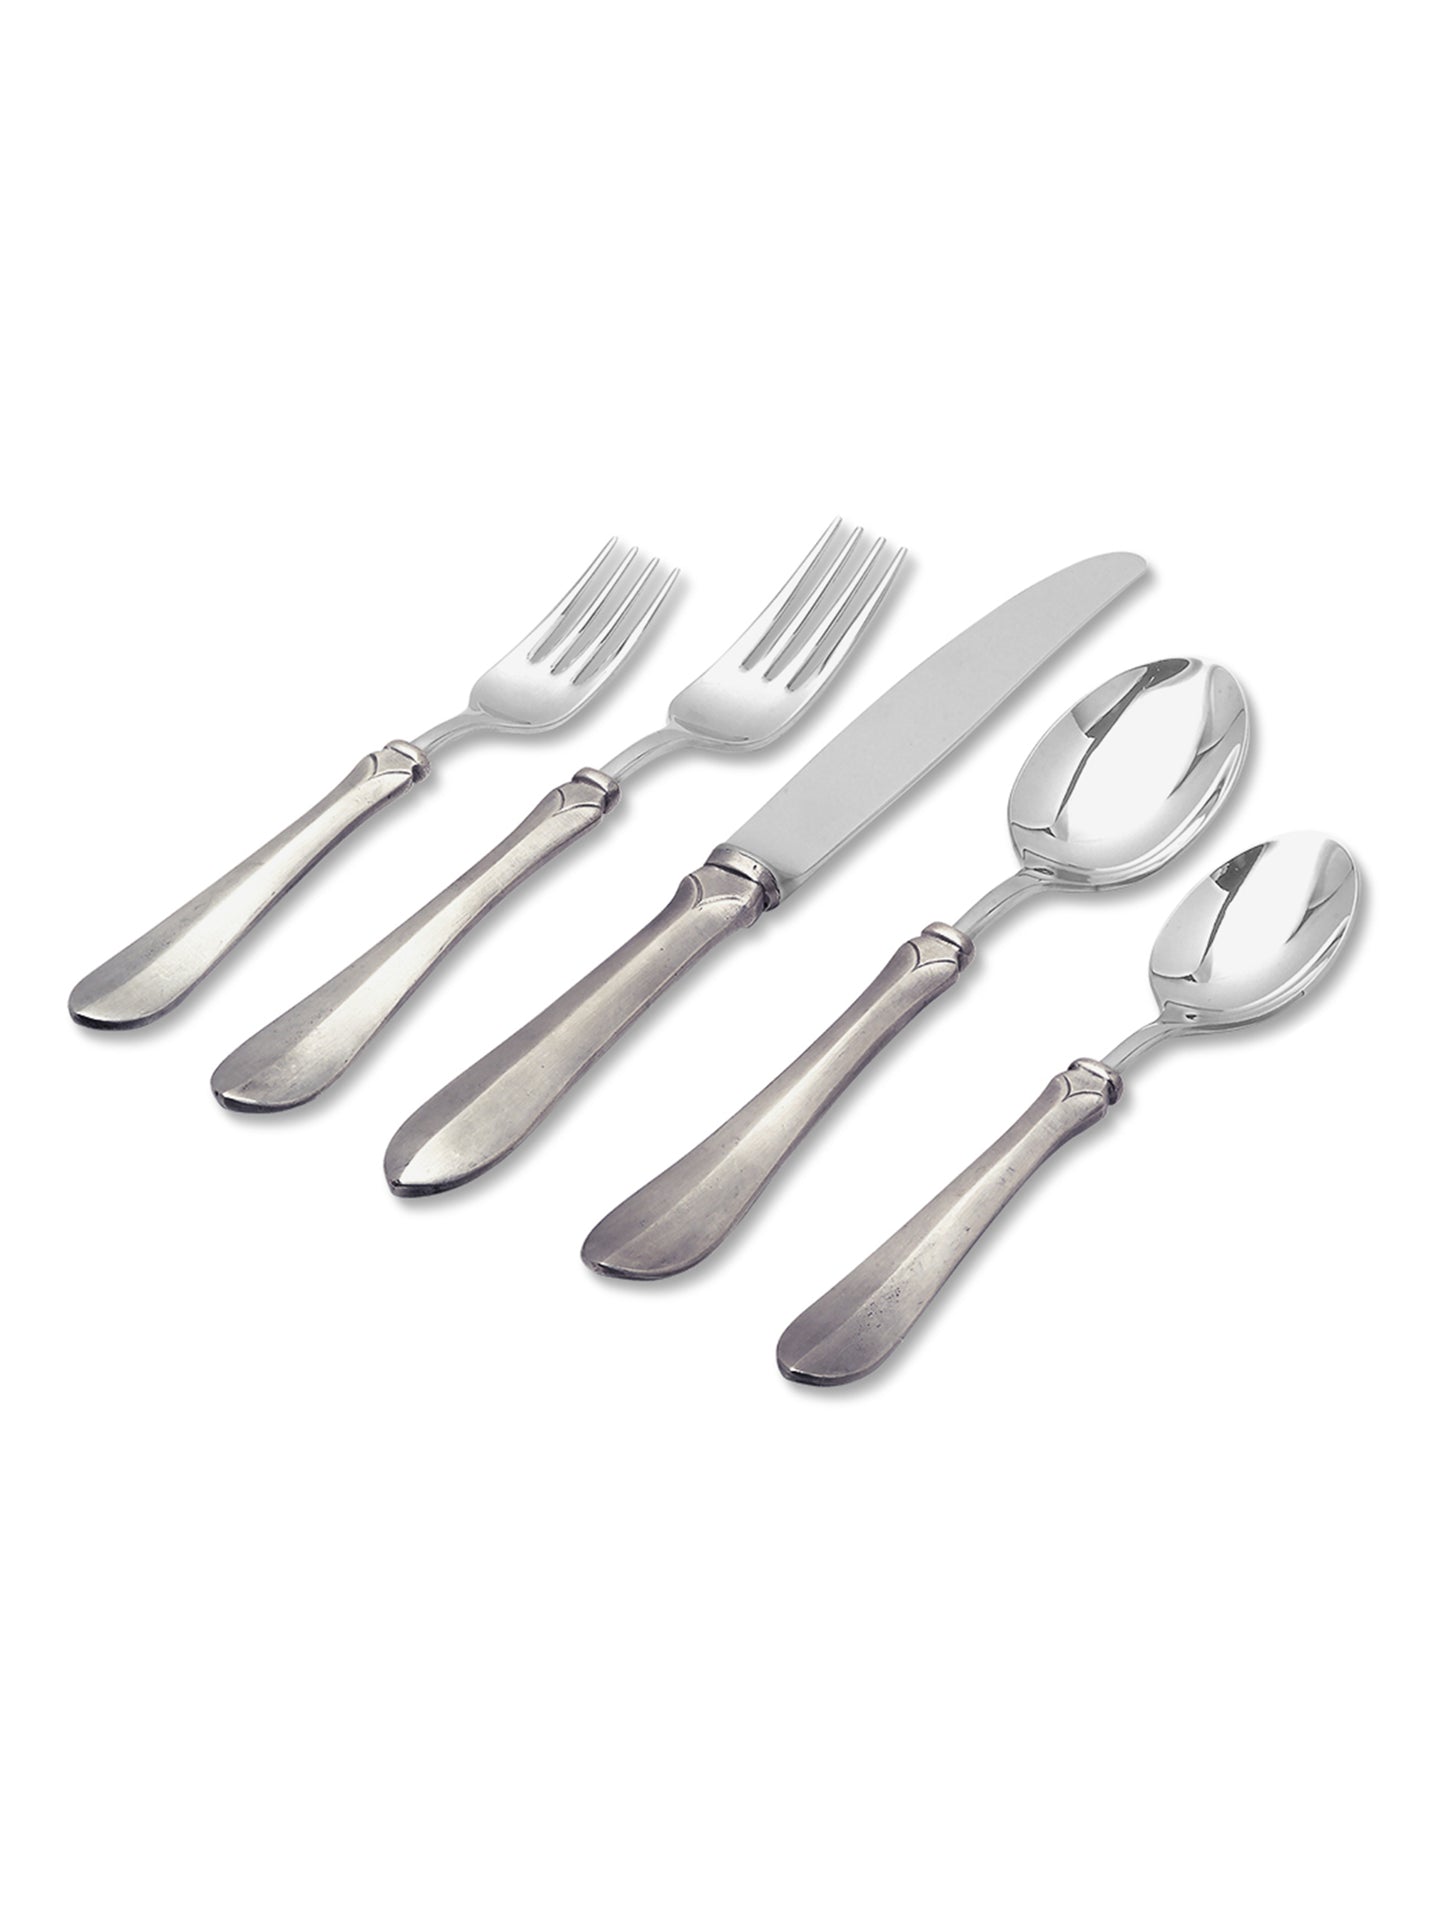 MATCH Pewter 5 Piece Place Setting Weston Table